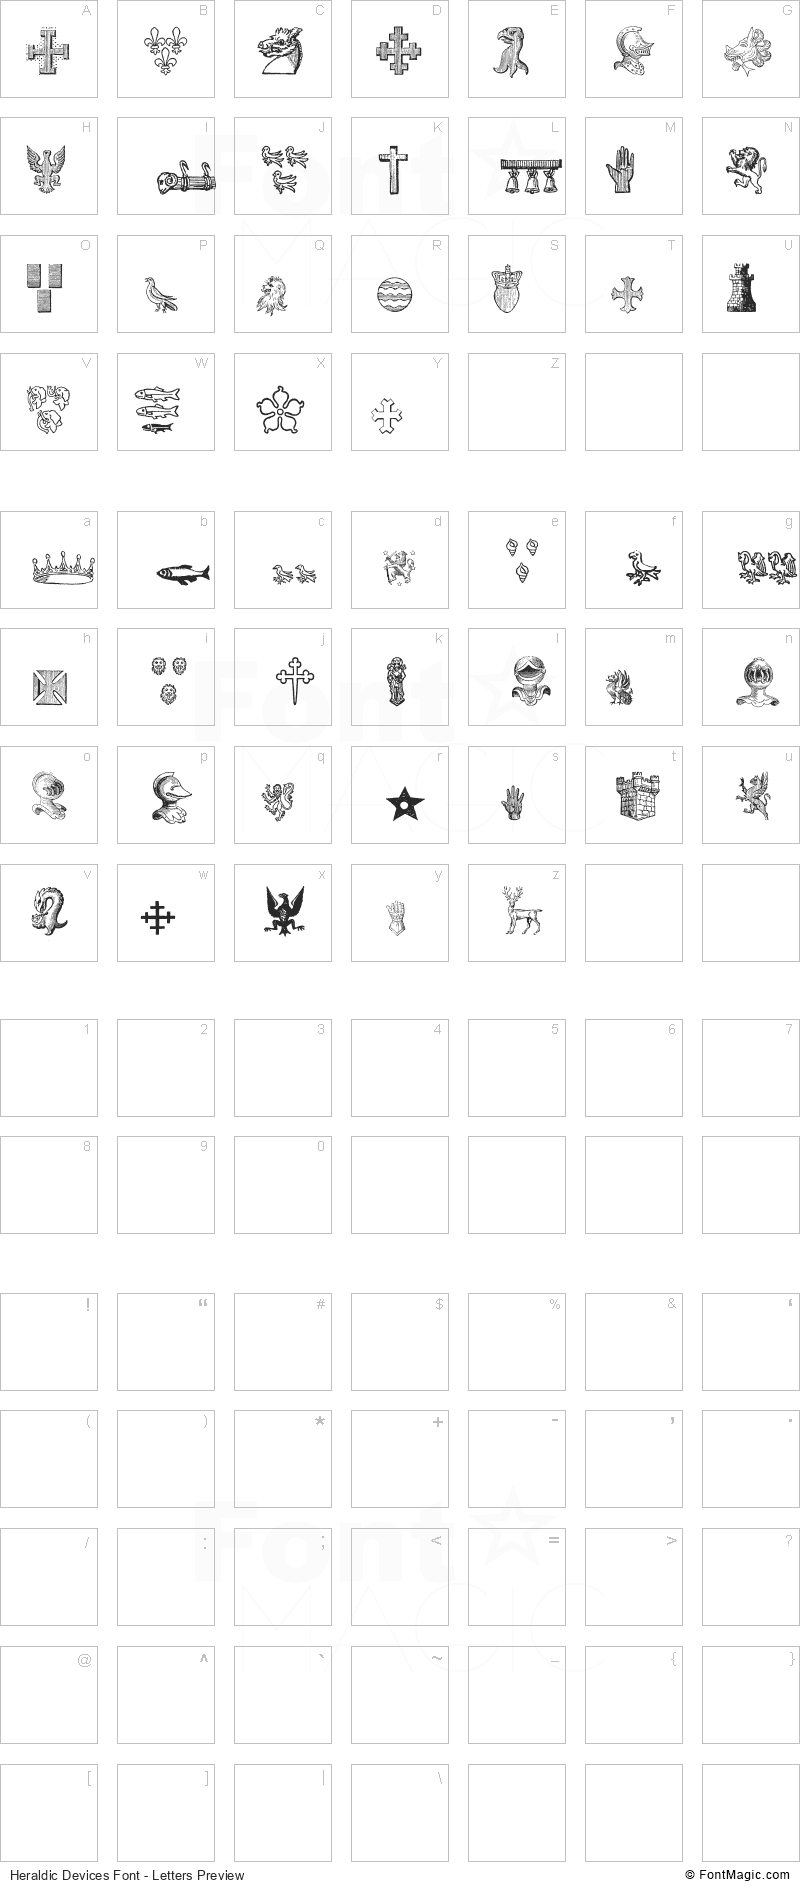 Heraldic Devices Font - All Latters Preview Chart